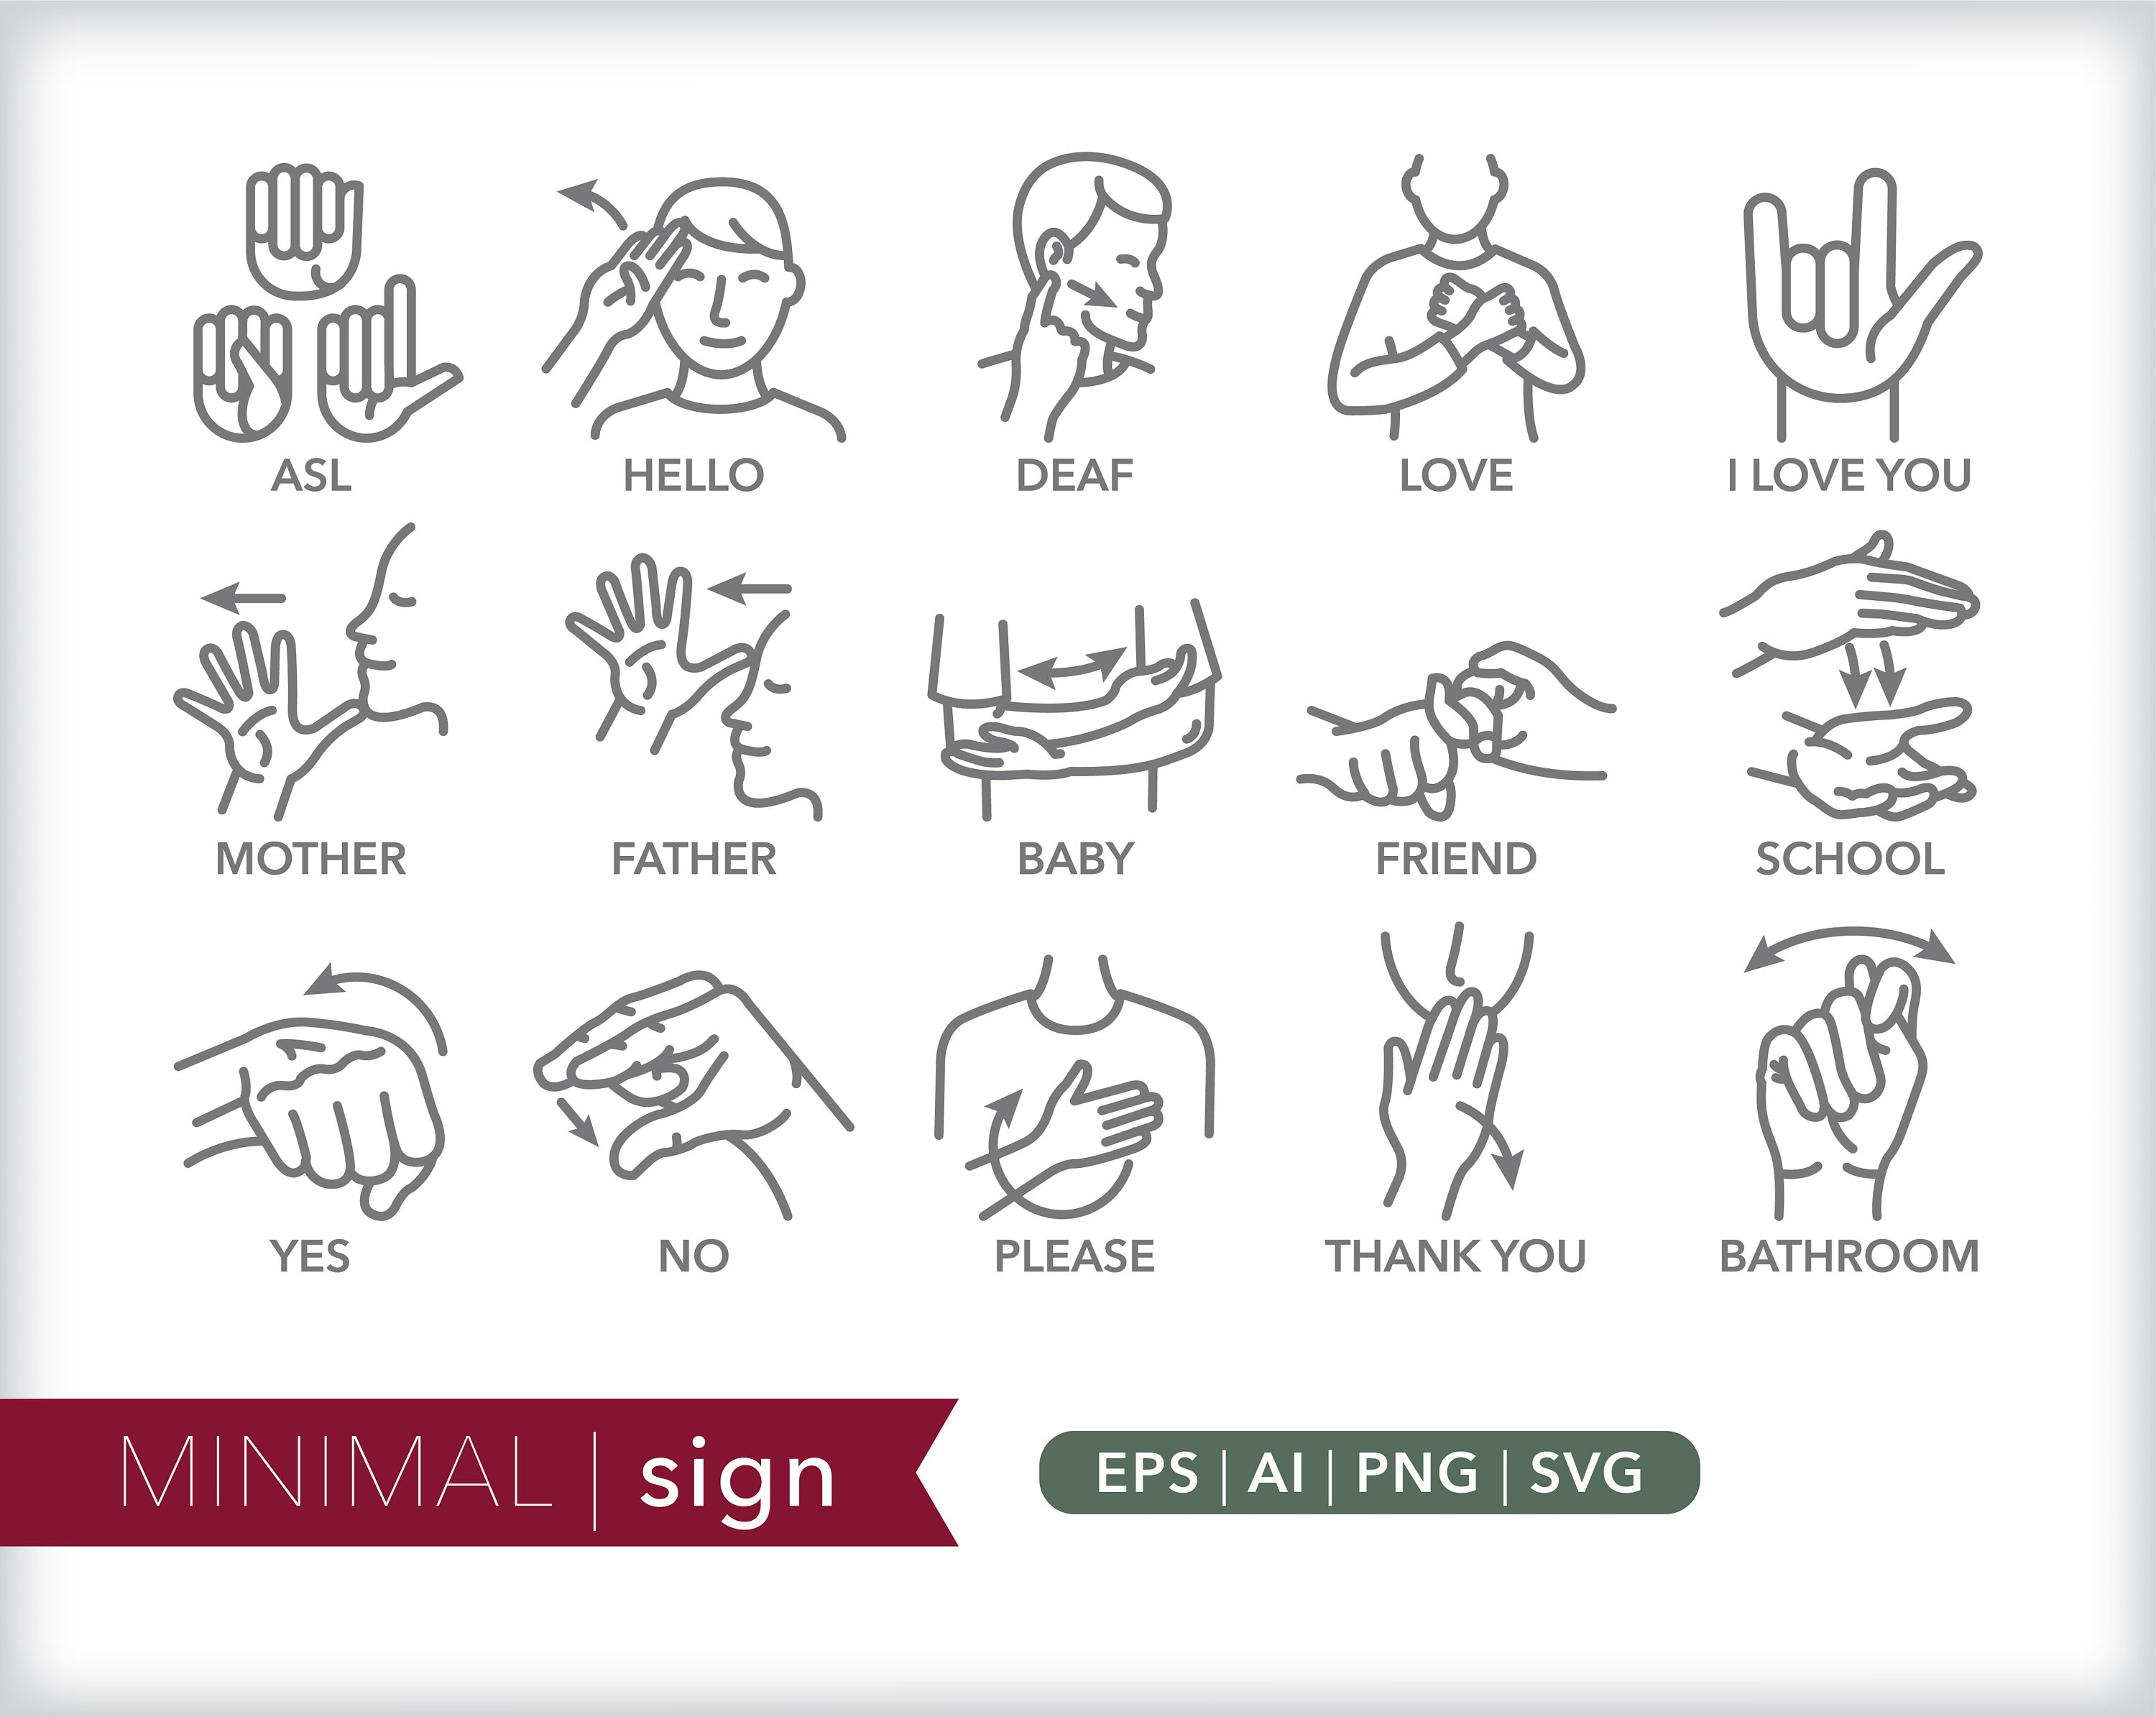 asl sign for mobile home